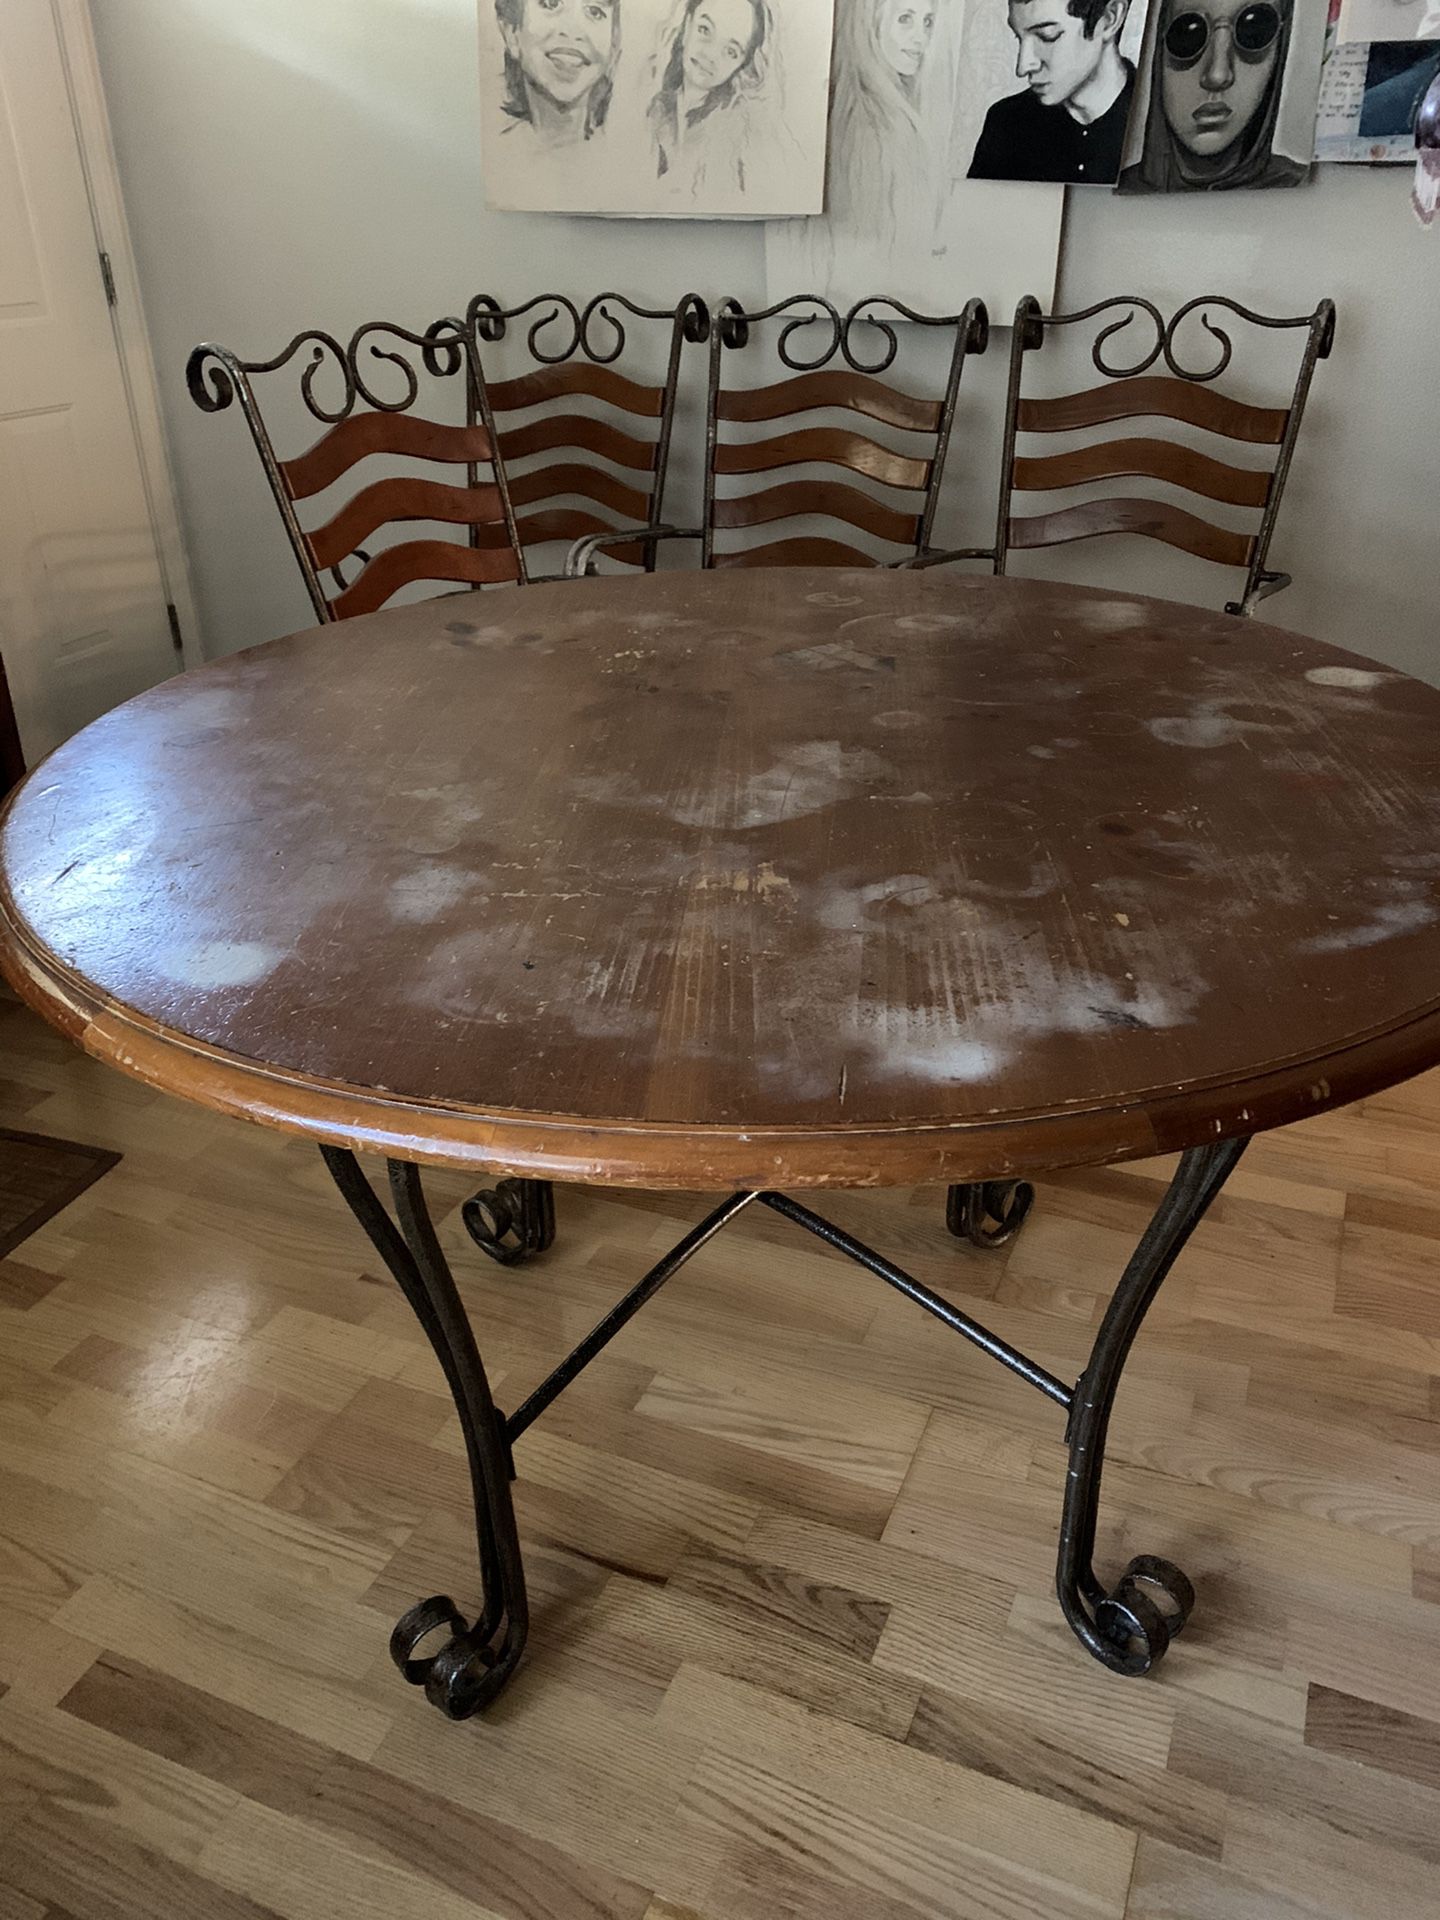 47” Round solid wood kitchen table